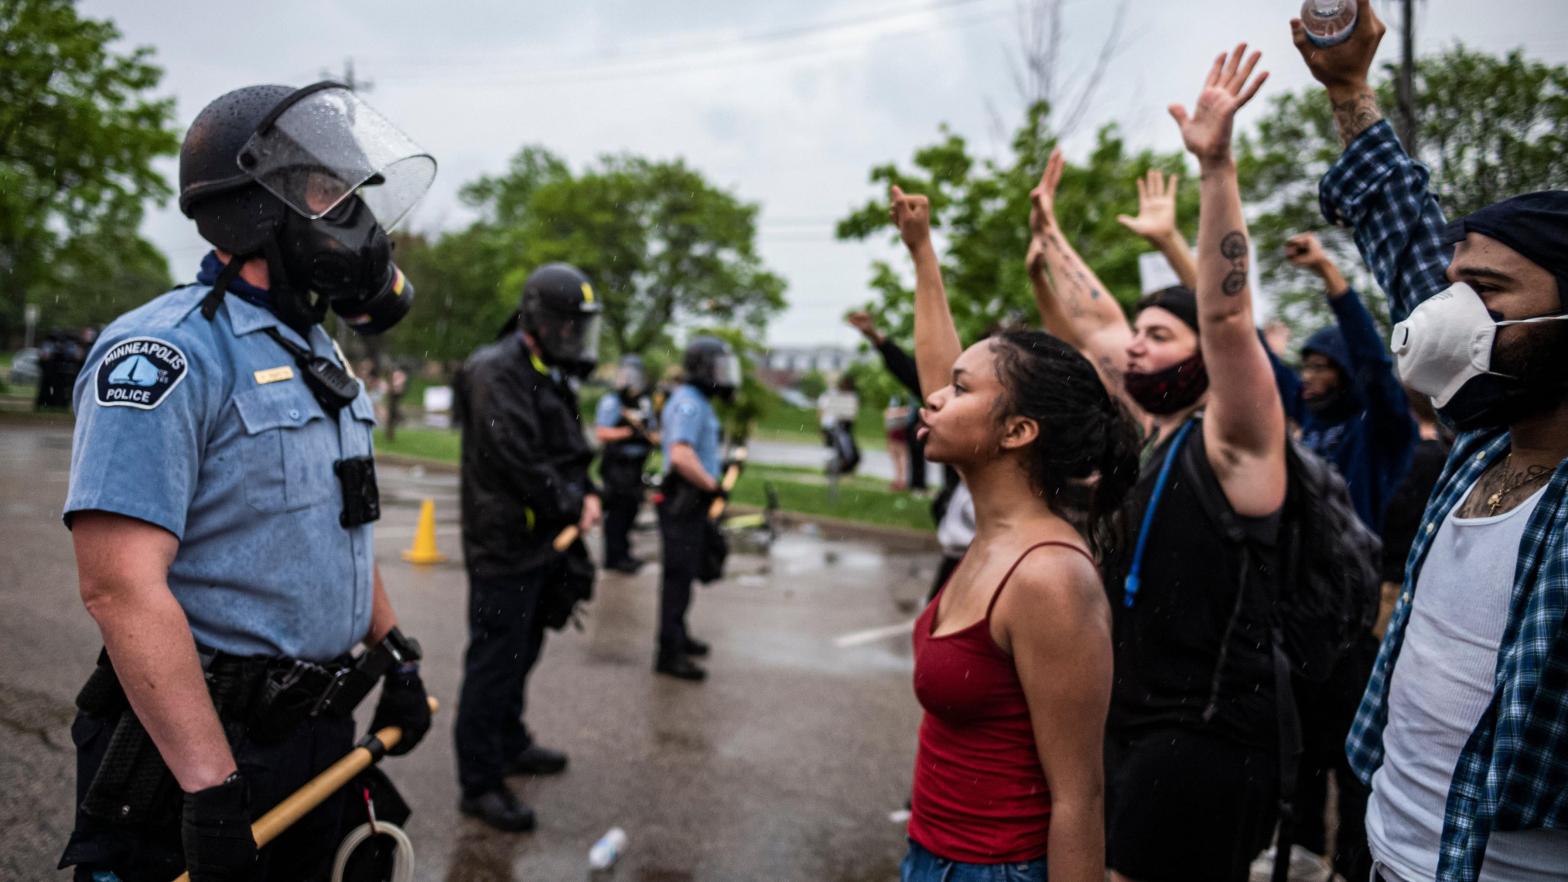 Protesters and police face each other during a rally for George Floyd in Minneapolis on May 26, 2020. (Photo: Richard Tsong-Taatarii, AP)